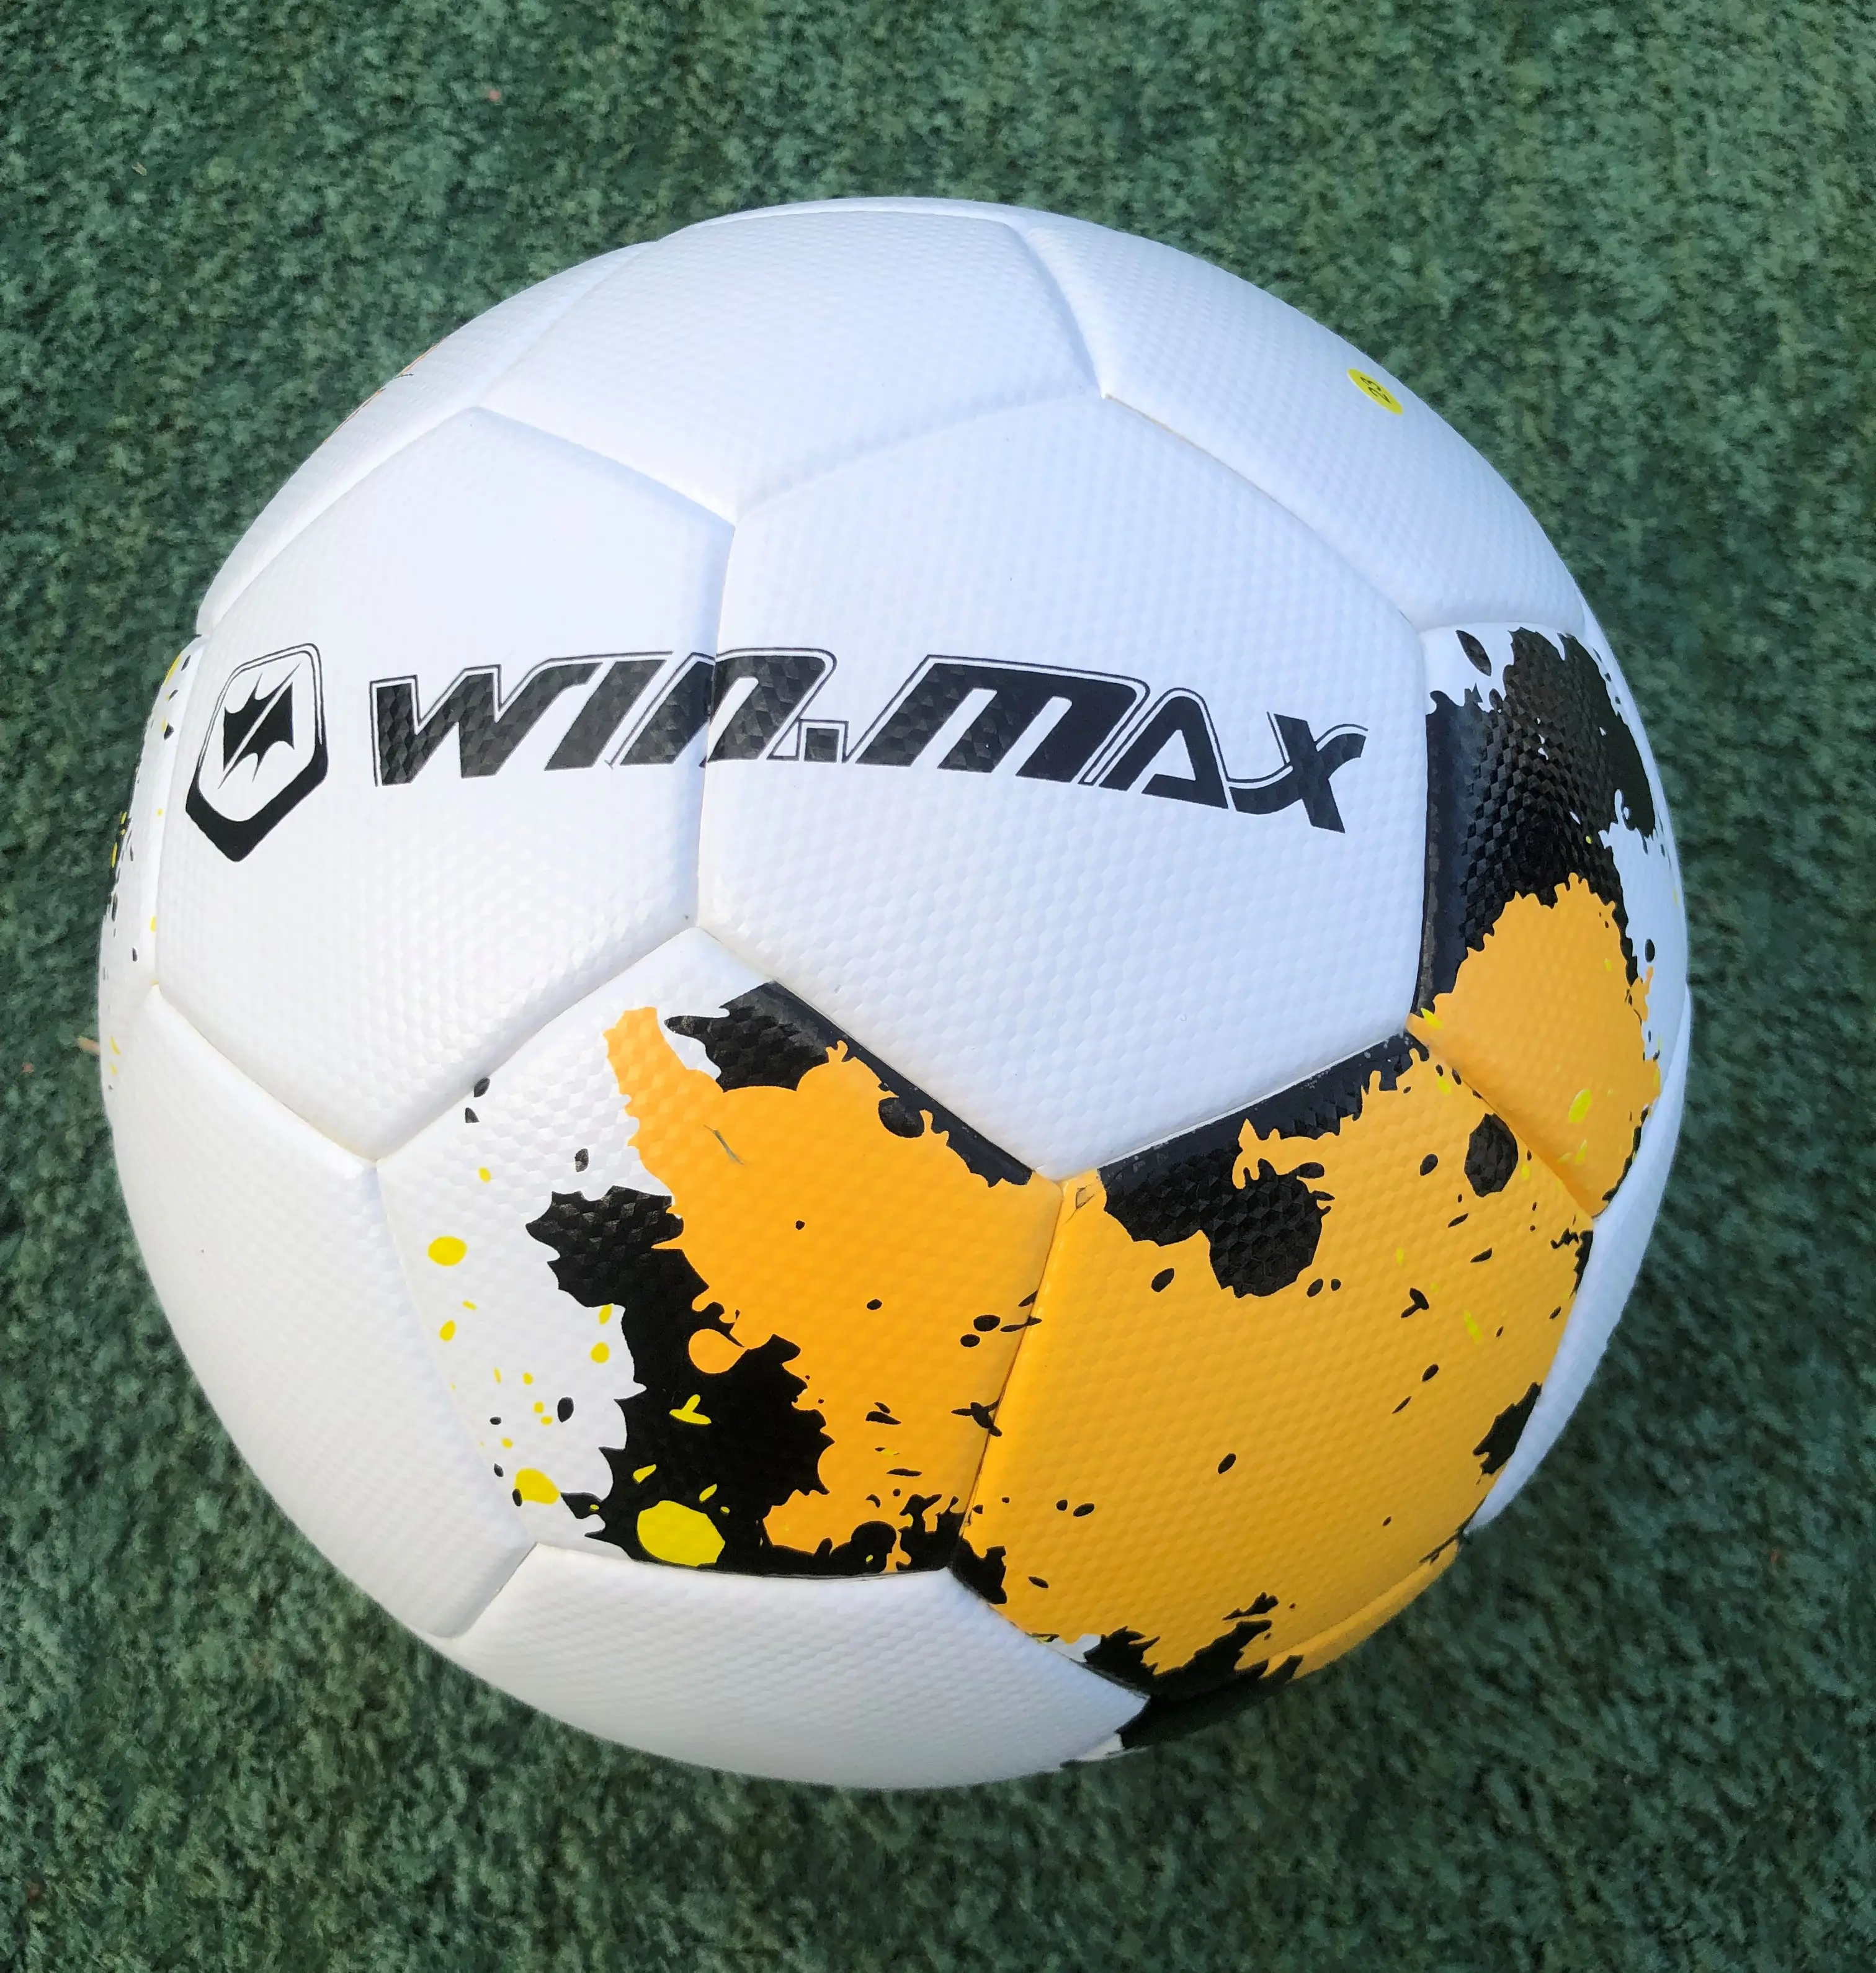 New Arrival WIN.MAX Professional Soccer Ball Size 4 Outdoor Game Football